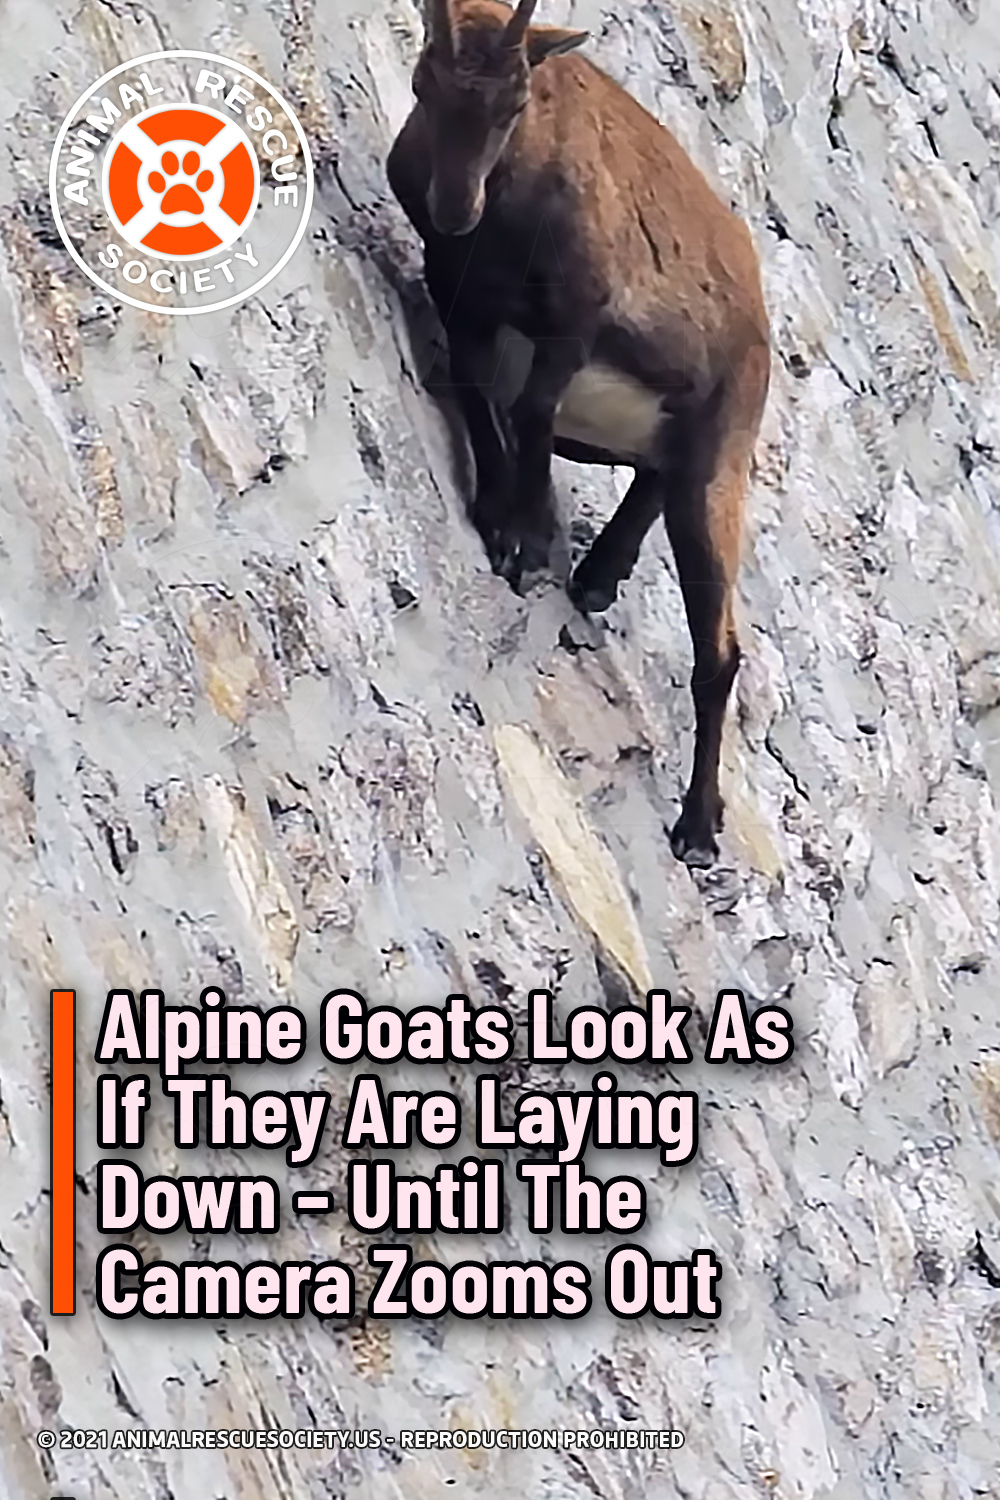 Alpine Goats Look As If They Are Laying Down – Until The Camera Zooms Out